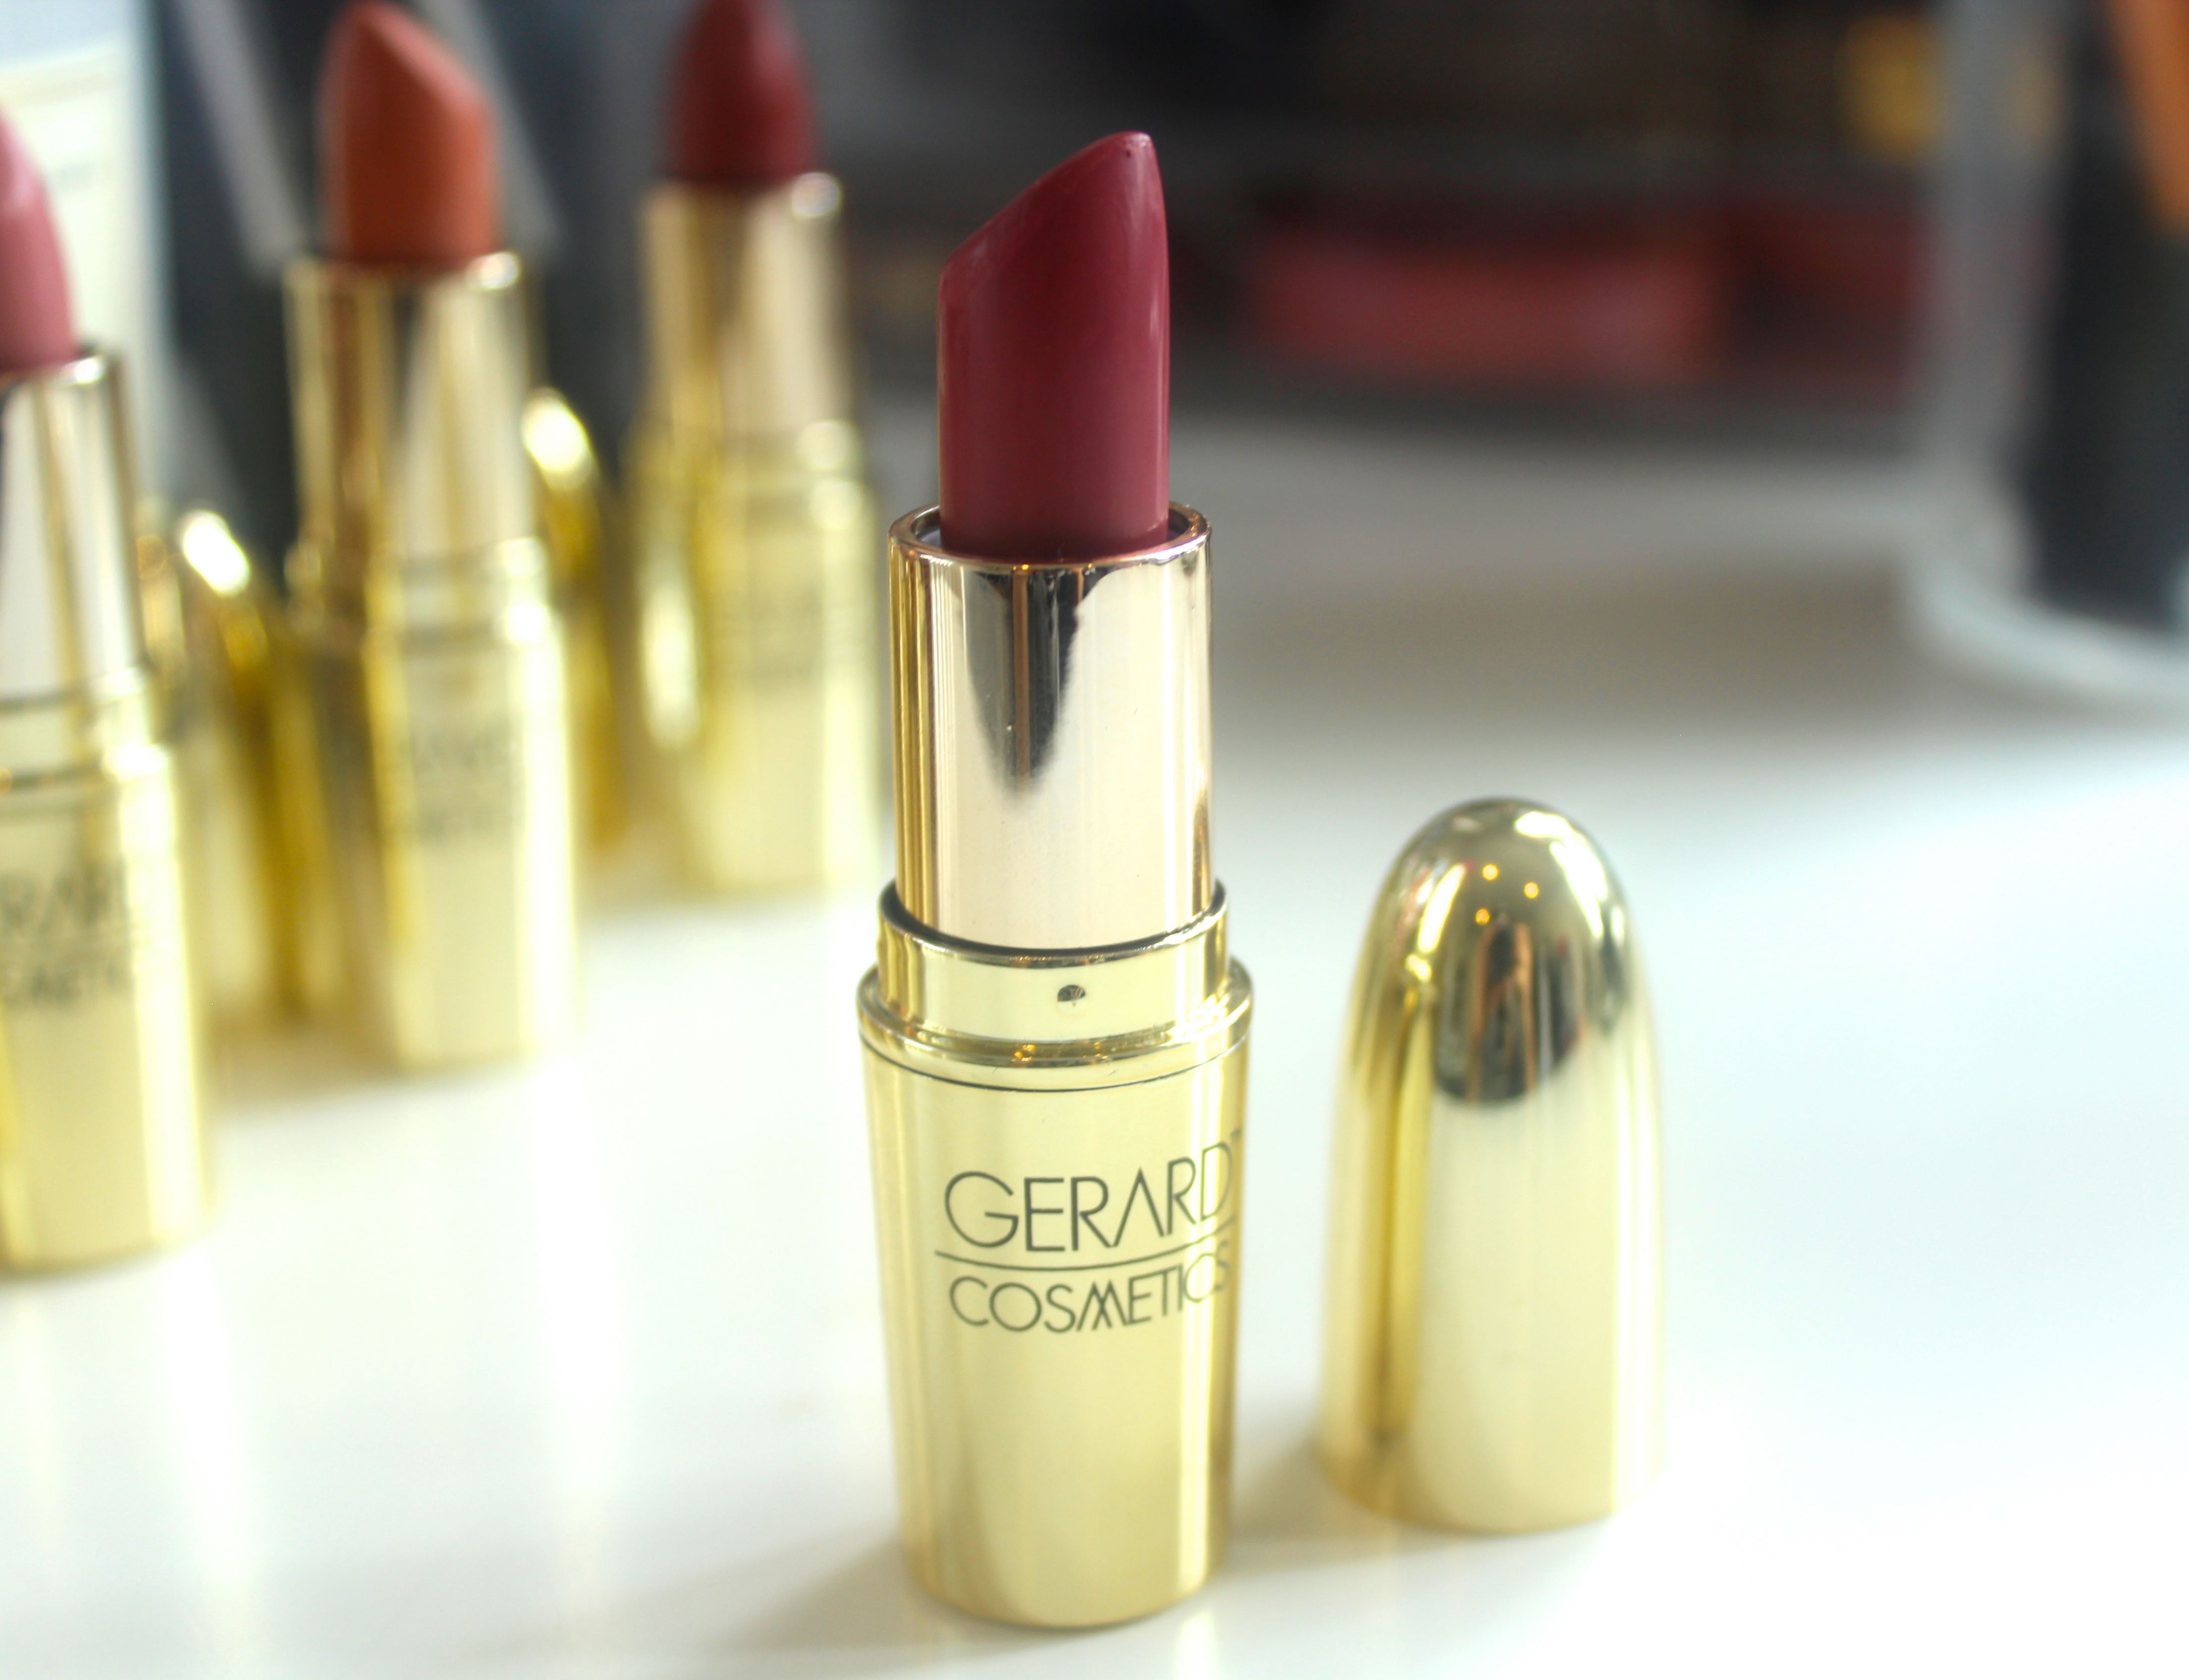 Gerard Lipsticks Rodeo Drive Review by Face Made Up